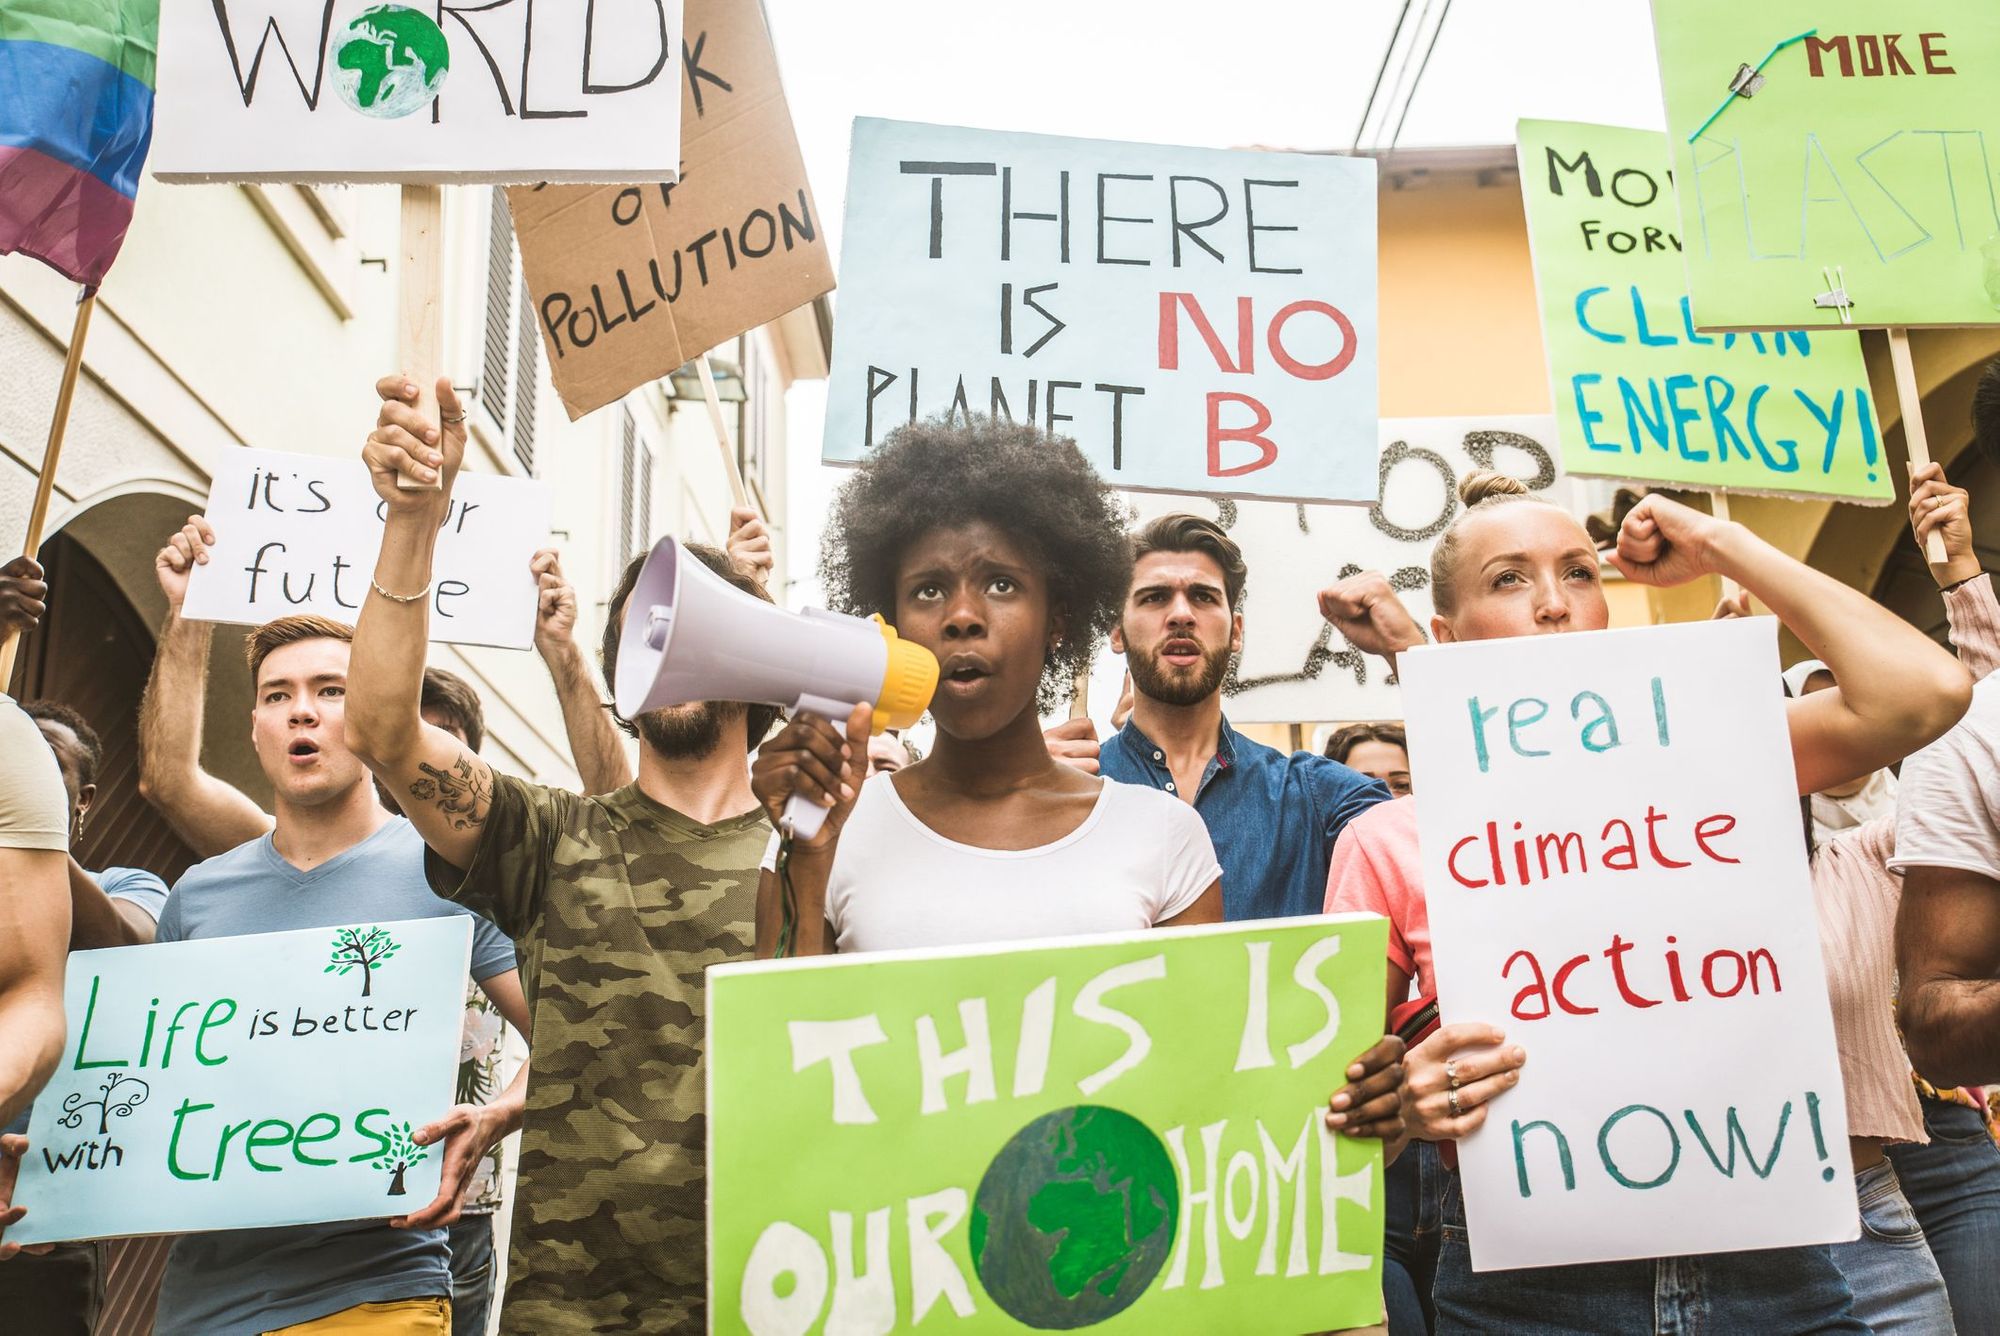 A climate change protest. Protesters of different races hold signs saying 'There is No Planet B' and 'Real Climate Action Now'